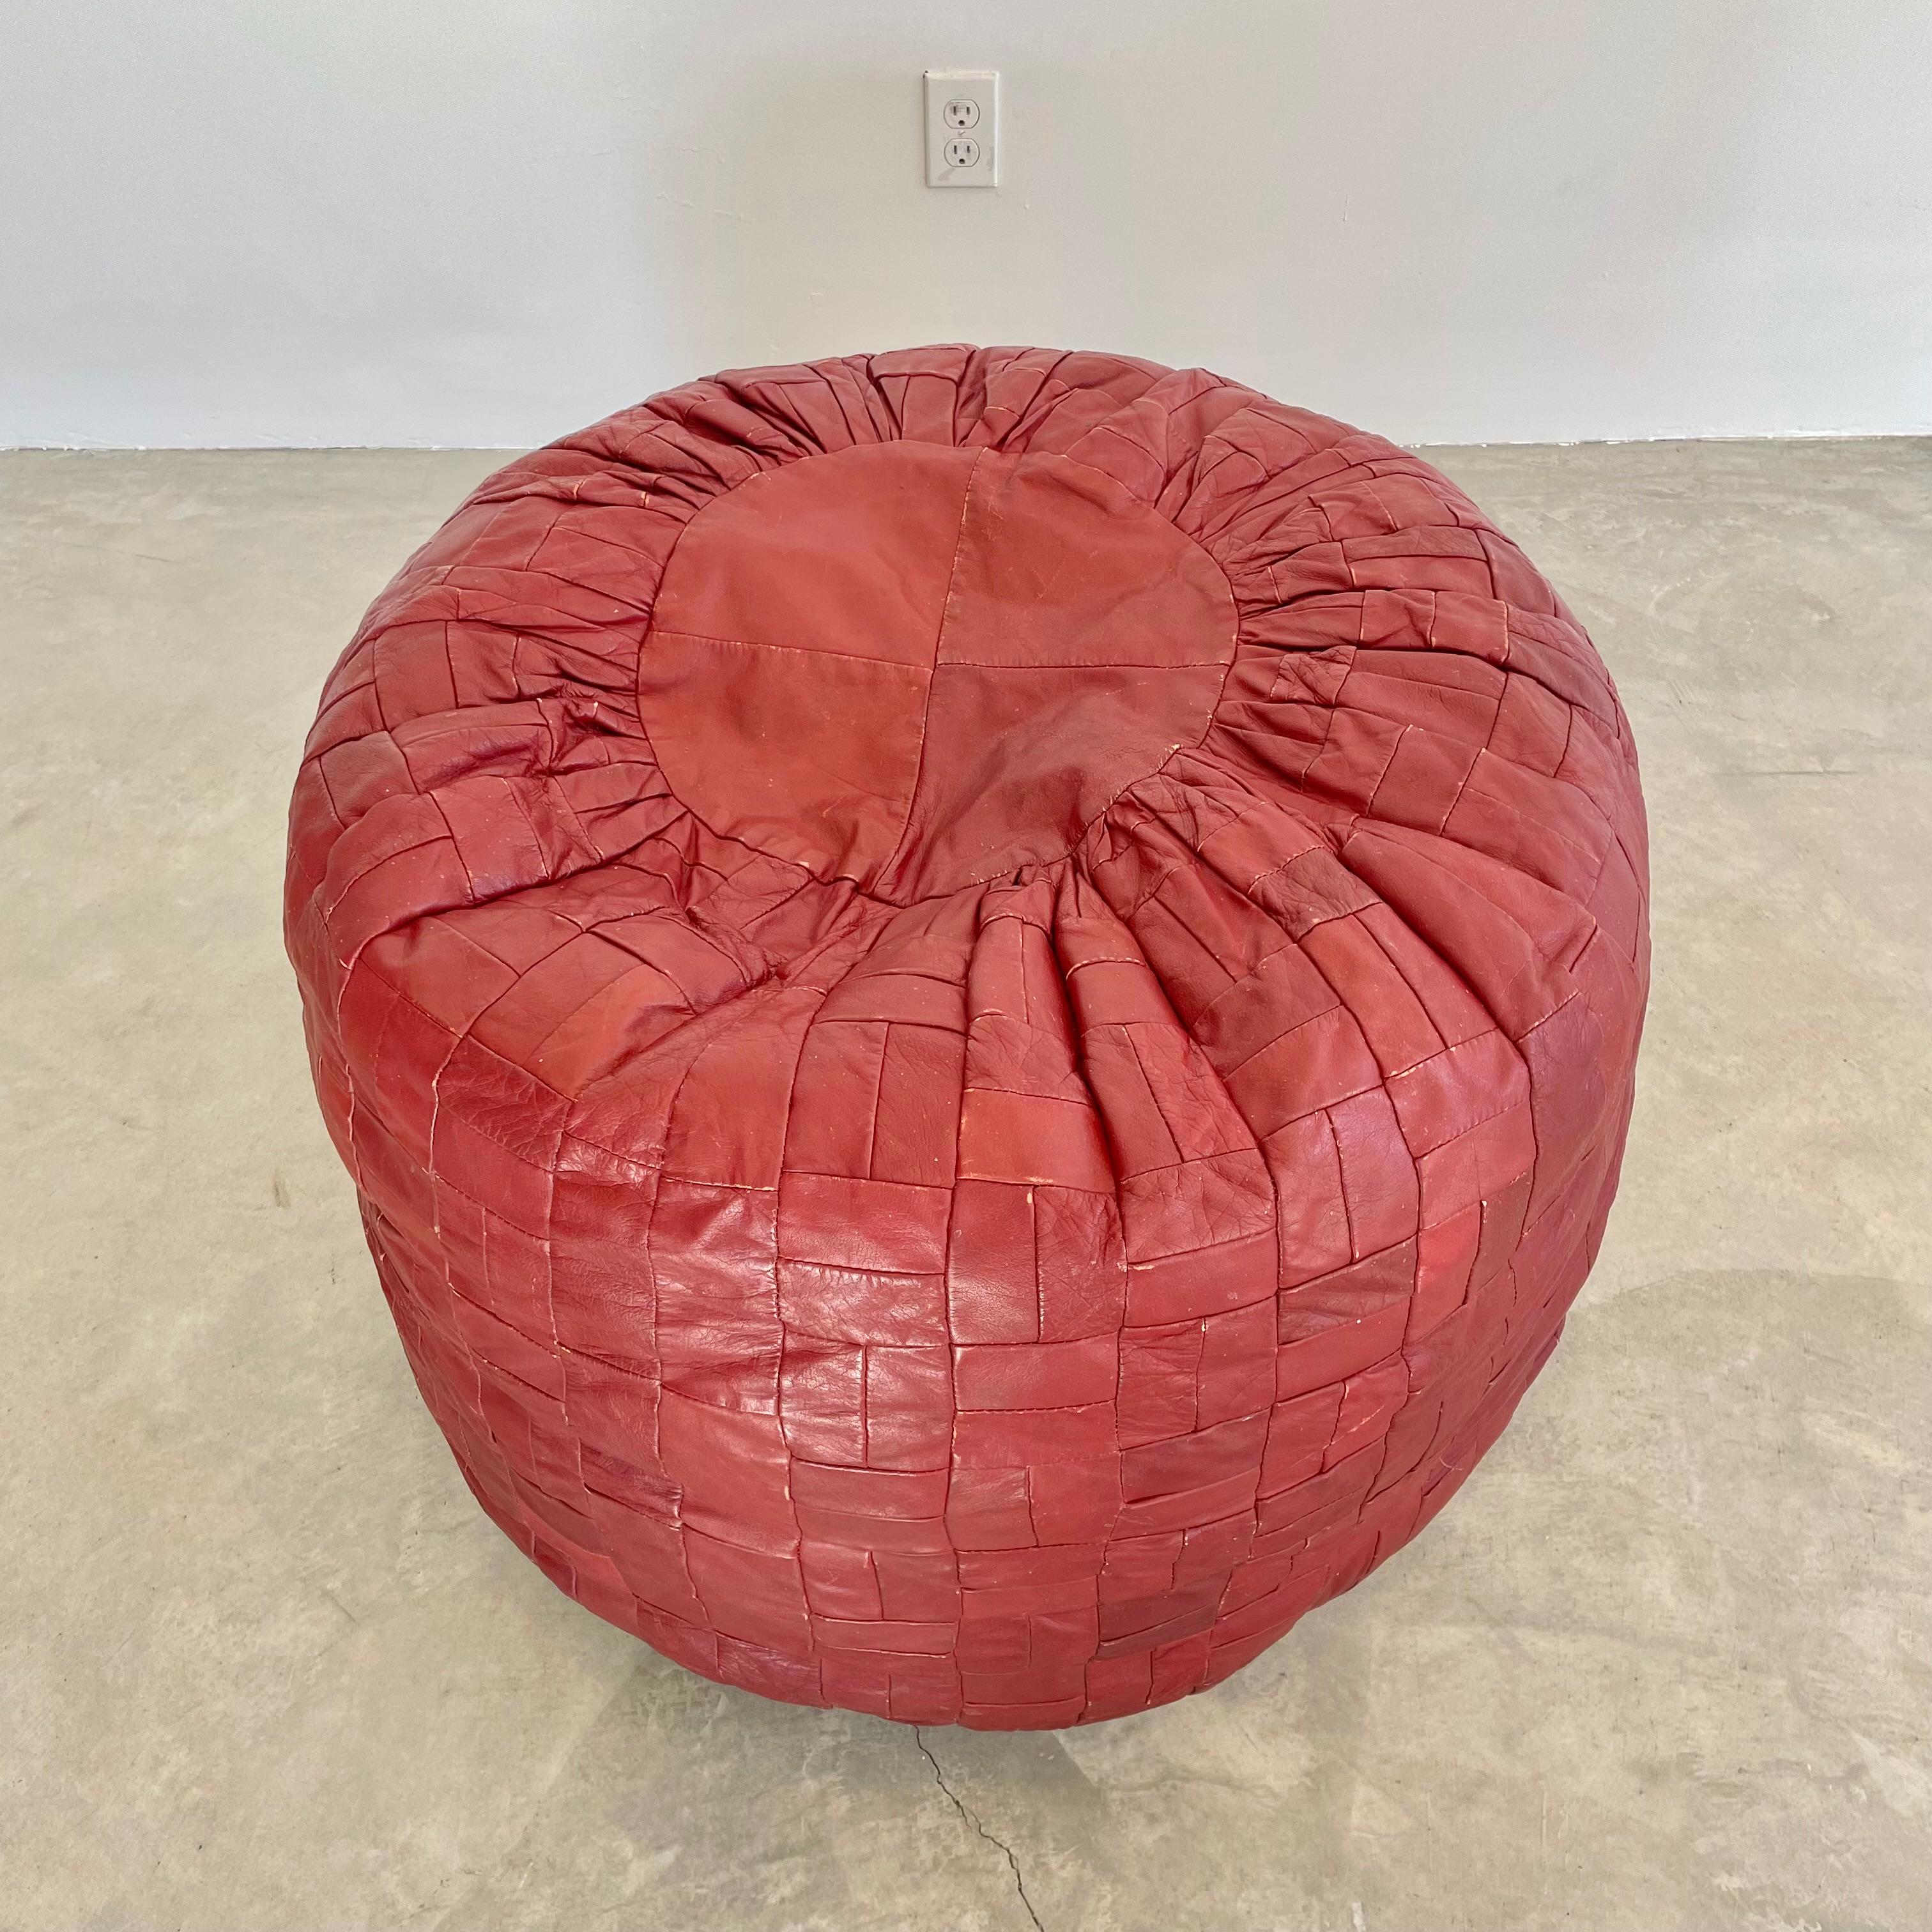 Giant patchwork leather ottomans by De Sede, Switzerland. Made in the 1970s. Deep burgundy color. Great patina and coloring to leather. Extremely unusual in that they are giant cylinders. Massive scale, just over 2 feet tall and just under 3 feet